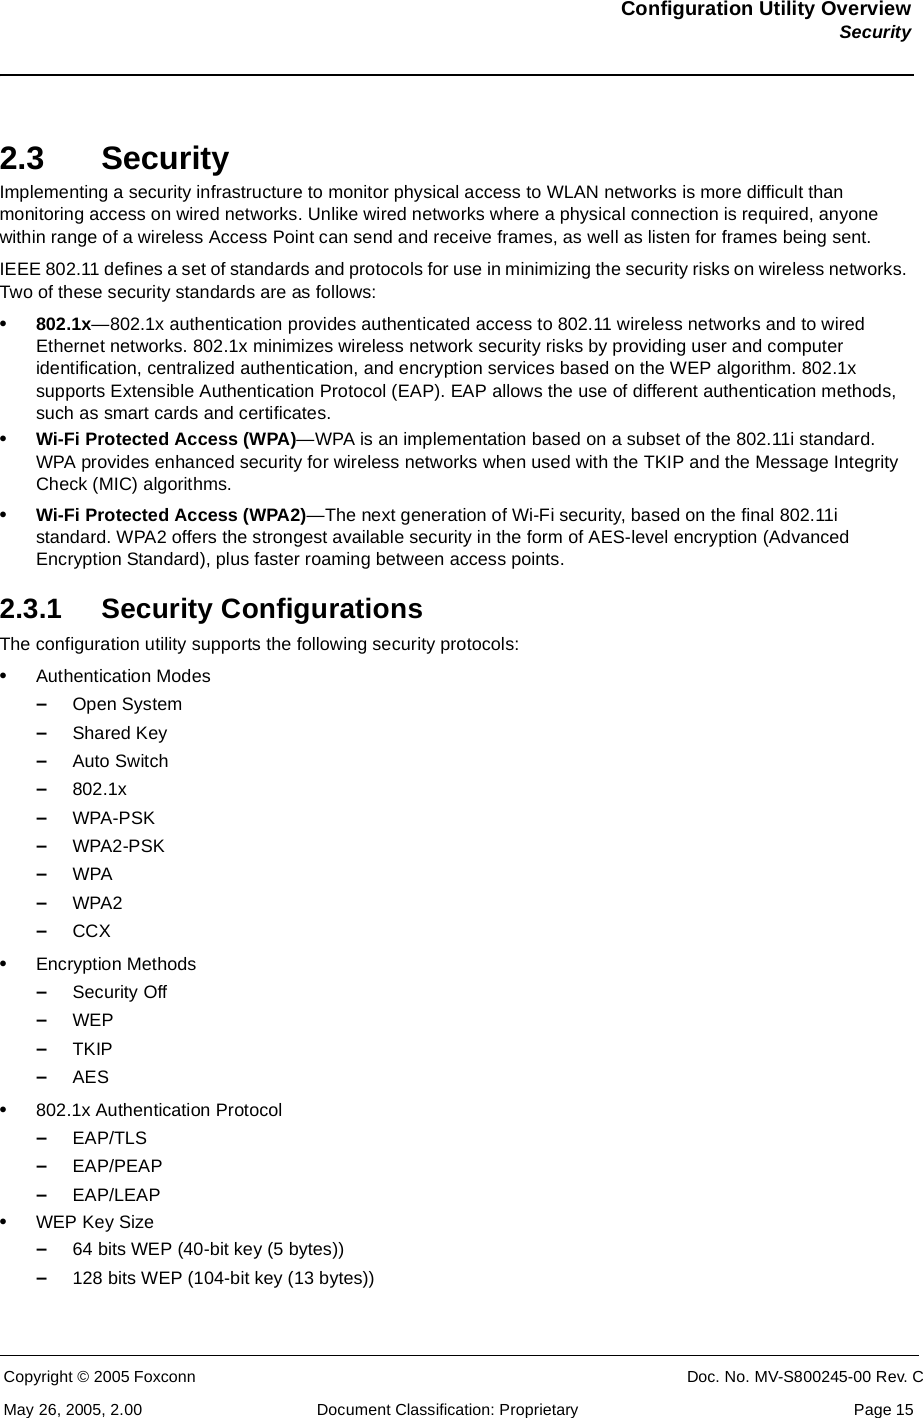 Configuration Utility OverviewSecurityCopyright © 2005 Foxconn CONFIDENTIAL Doc. No. MV-S800245-00 Rev. CMay 26, 2005, 2.00 Document Classification: Proprietary  Page 152.3 SecurityImplementing a security infrastructure to monitor physical access to WLAN networks is more difficult than monitoring access on wired networks. Unlike wired networks where a physical connection is required, anyone within range of a wireless Access Point can send and receive frames, as well as listen for frames being sent.IEEE 802.11 defines a set of standards and protocols for use in minimizing the security risks on wireless networks. Two of these security standards are as follows:•802.1x—802.1x authentication provides authenticated access to 802.11 wireless networks and to wired Ethernet networks. 802.1x minimizes wireless network security risks by providing user and computer identification, centralized authentication, and encryption services based on the WEP algorithm. 802.1x supports Extensible Authentication Protocol (EAP). EAP allows the use of different authentication methods, such as smart cards and certificates.•Wi-Fi Protected Access (WPA)—WPA is an implementation based on a subset of the 802.11i standard. WPA provides enhanced security for wireless networks when used with the TKIP and the Message Integrity Check (MIC) algorithms.•Wi-Fi Protected Access (WPA2)—The next generation of Wi-Fi security, based on the final 802.11i standard. WPA2 offers the strongest available security in the form of AES-level encryption (Advanced Encryption Standard), plus faster roaming between access points.2.3.1 Security ConfigurationsThe configuration utility supports the following security protocols:•Authentication Modes–Open System–Shared Key–Auto Switch–802.1x–WPA-PSK–WPA2-PSK–WPA–WPA2–CCX•Encryption Methods–Security Off–WEP–TKIP–AES•802.1x Authentication Protocol–EAP/TLS–EAP/PEAP–EAP/LEAP•WEP Key Size–64 bits WEP (40-bit key (5 bytes))–128 bits WEP (104-bit key (13 bytes))